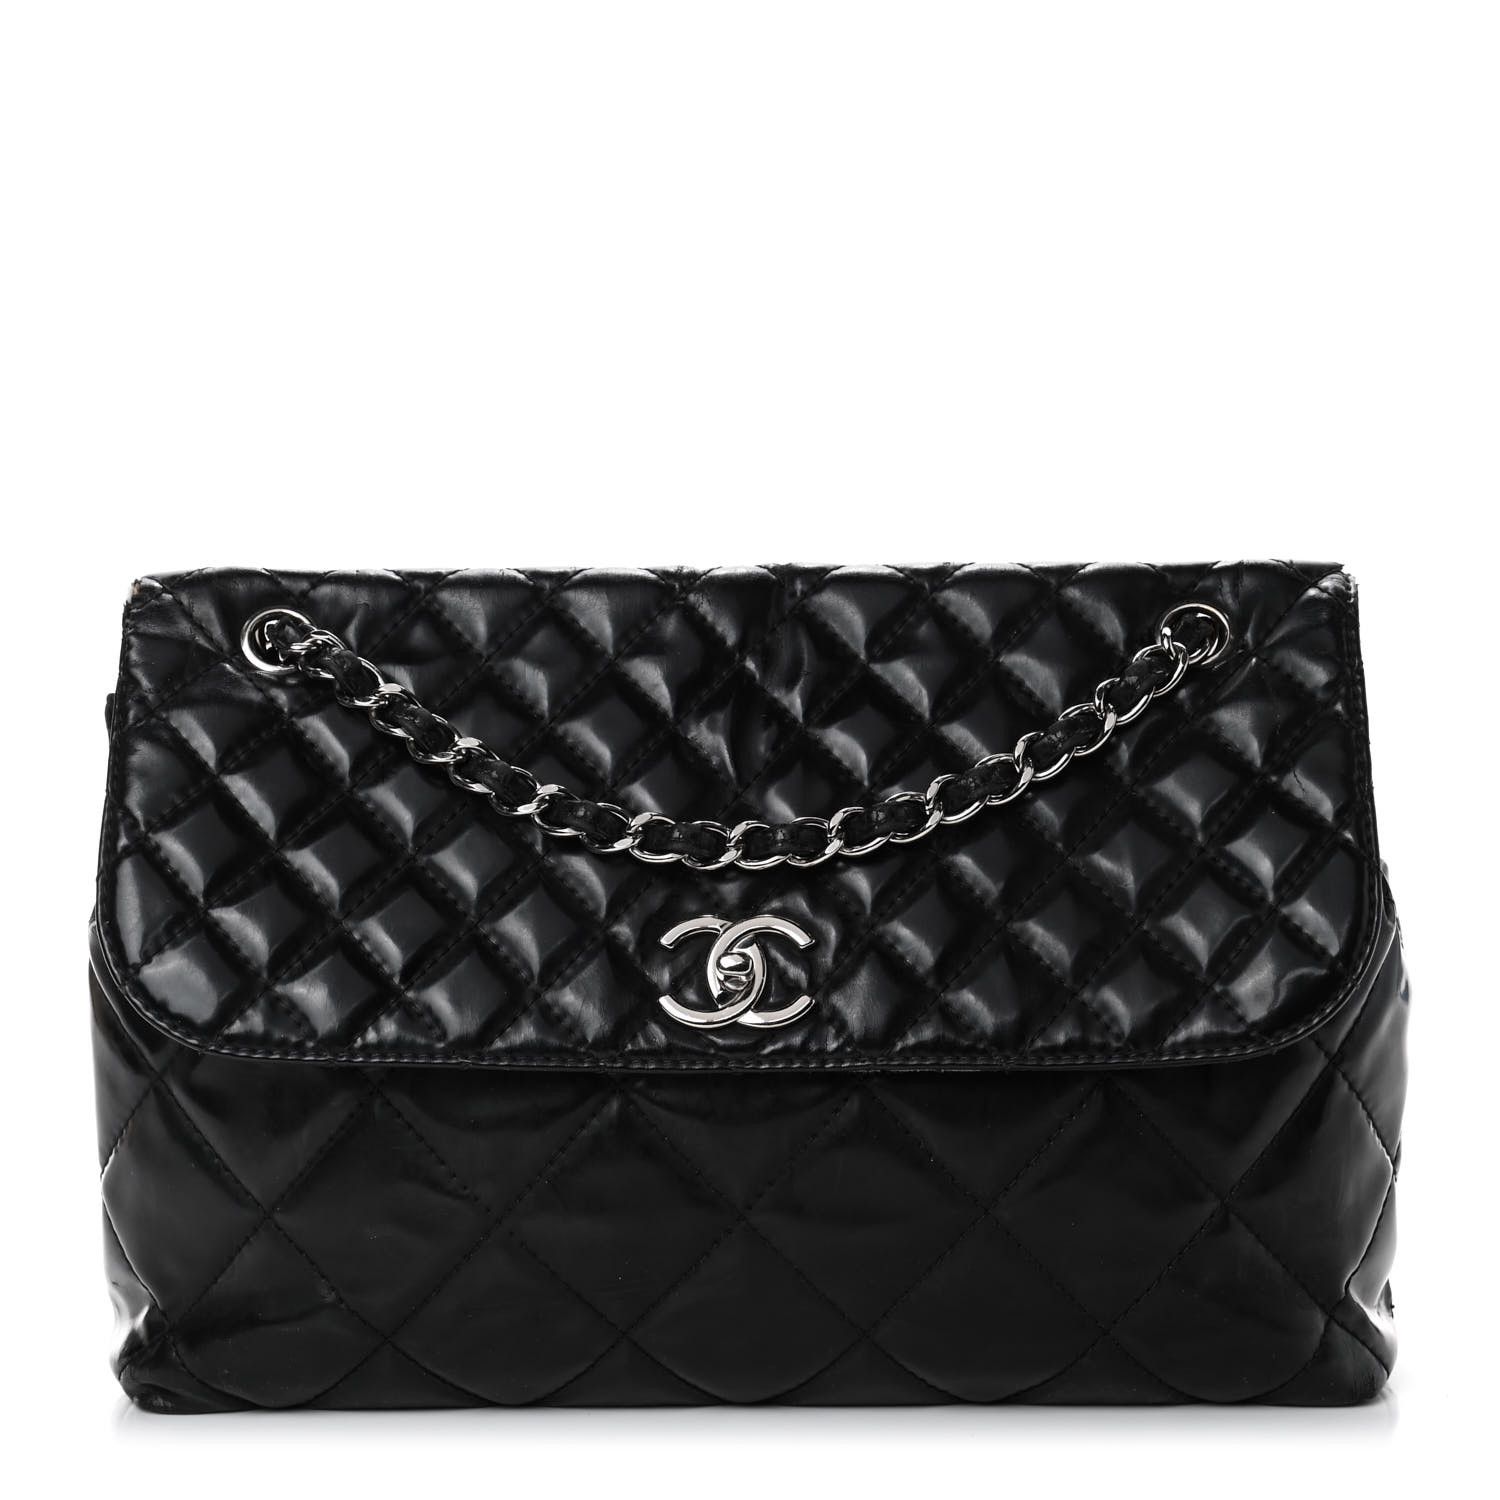 CHANEL

Vinyl Quilted In the Business Flap Bag Black | Fashionphile